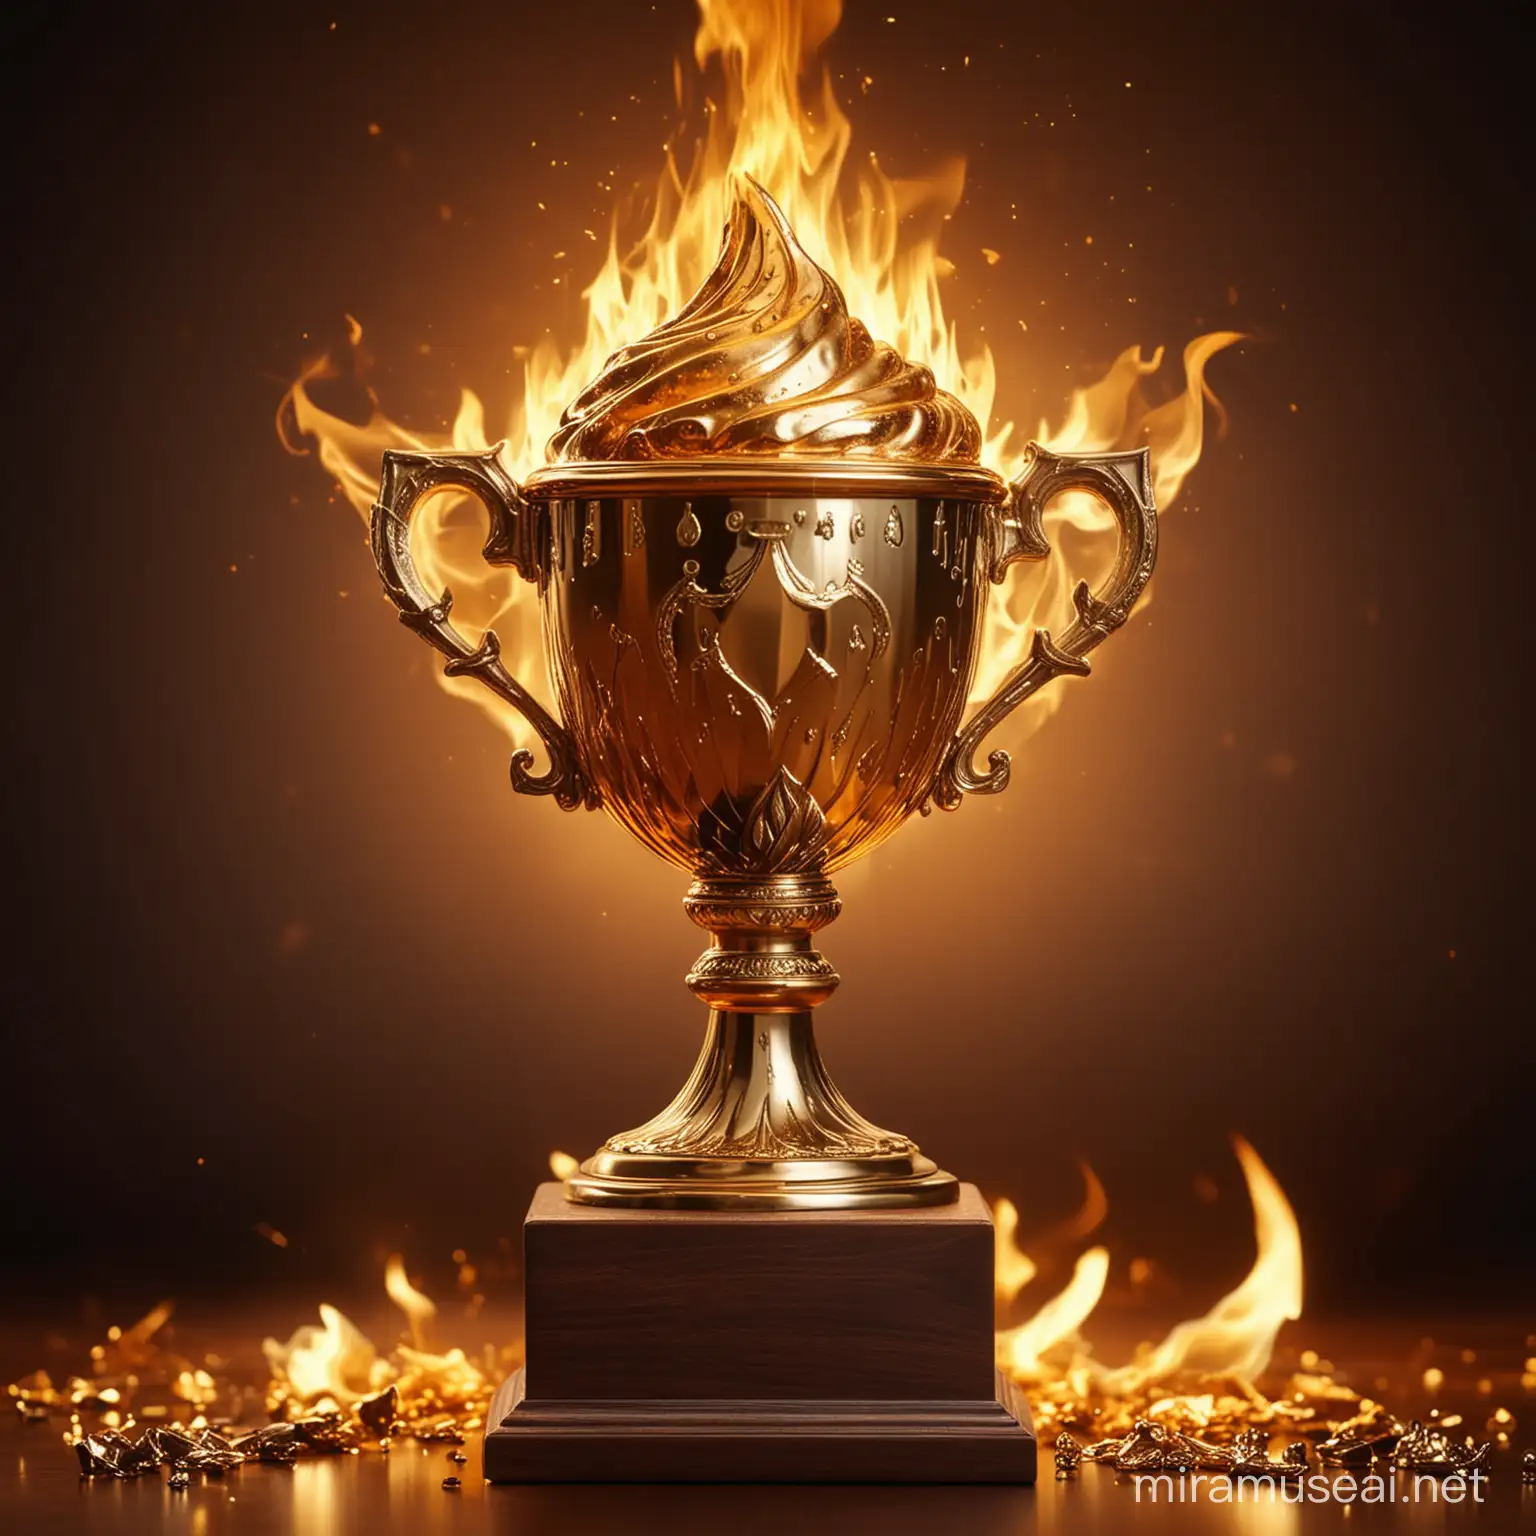 Golden Trophy with Fiery Background and Unique Ornament